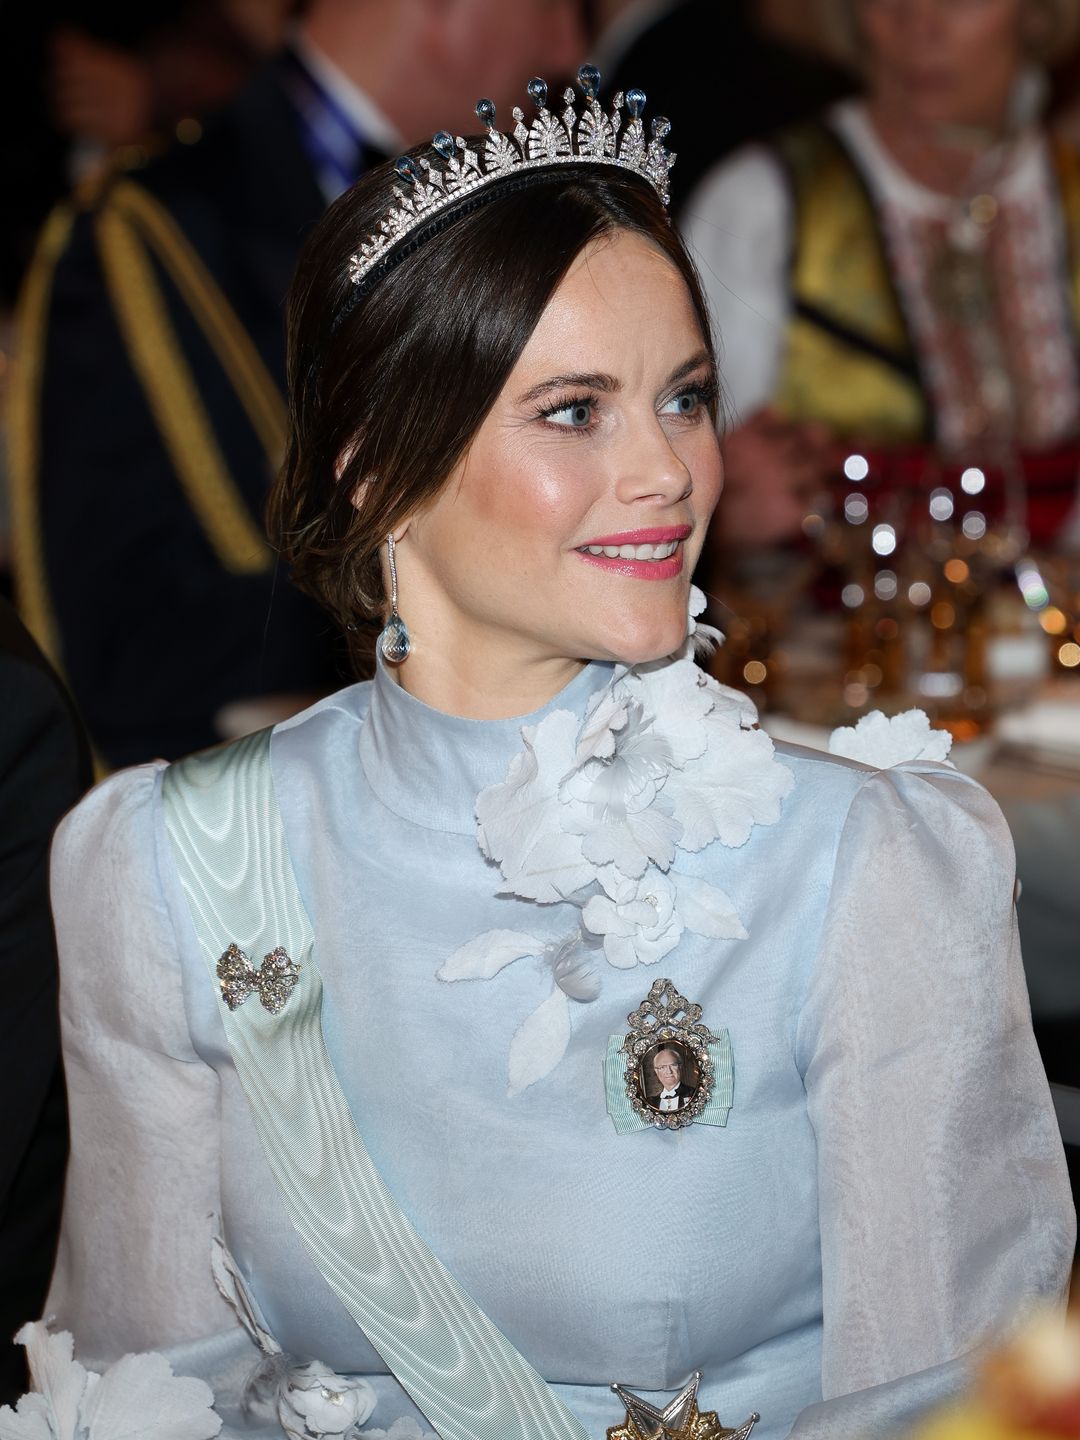 Princess Sofia of Sweden attend the Nobel Prize Banquet 2022 at Stockholm City in a babyblue gown